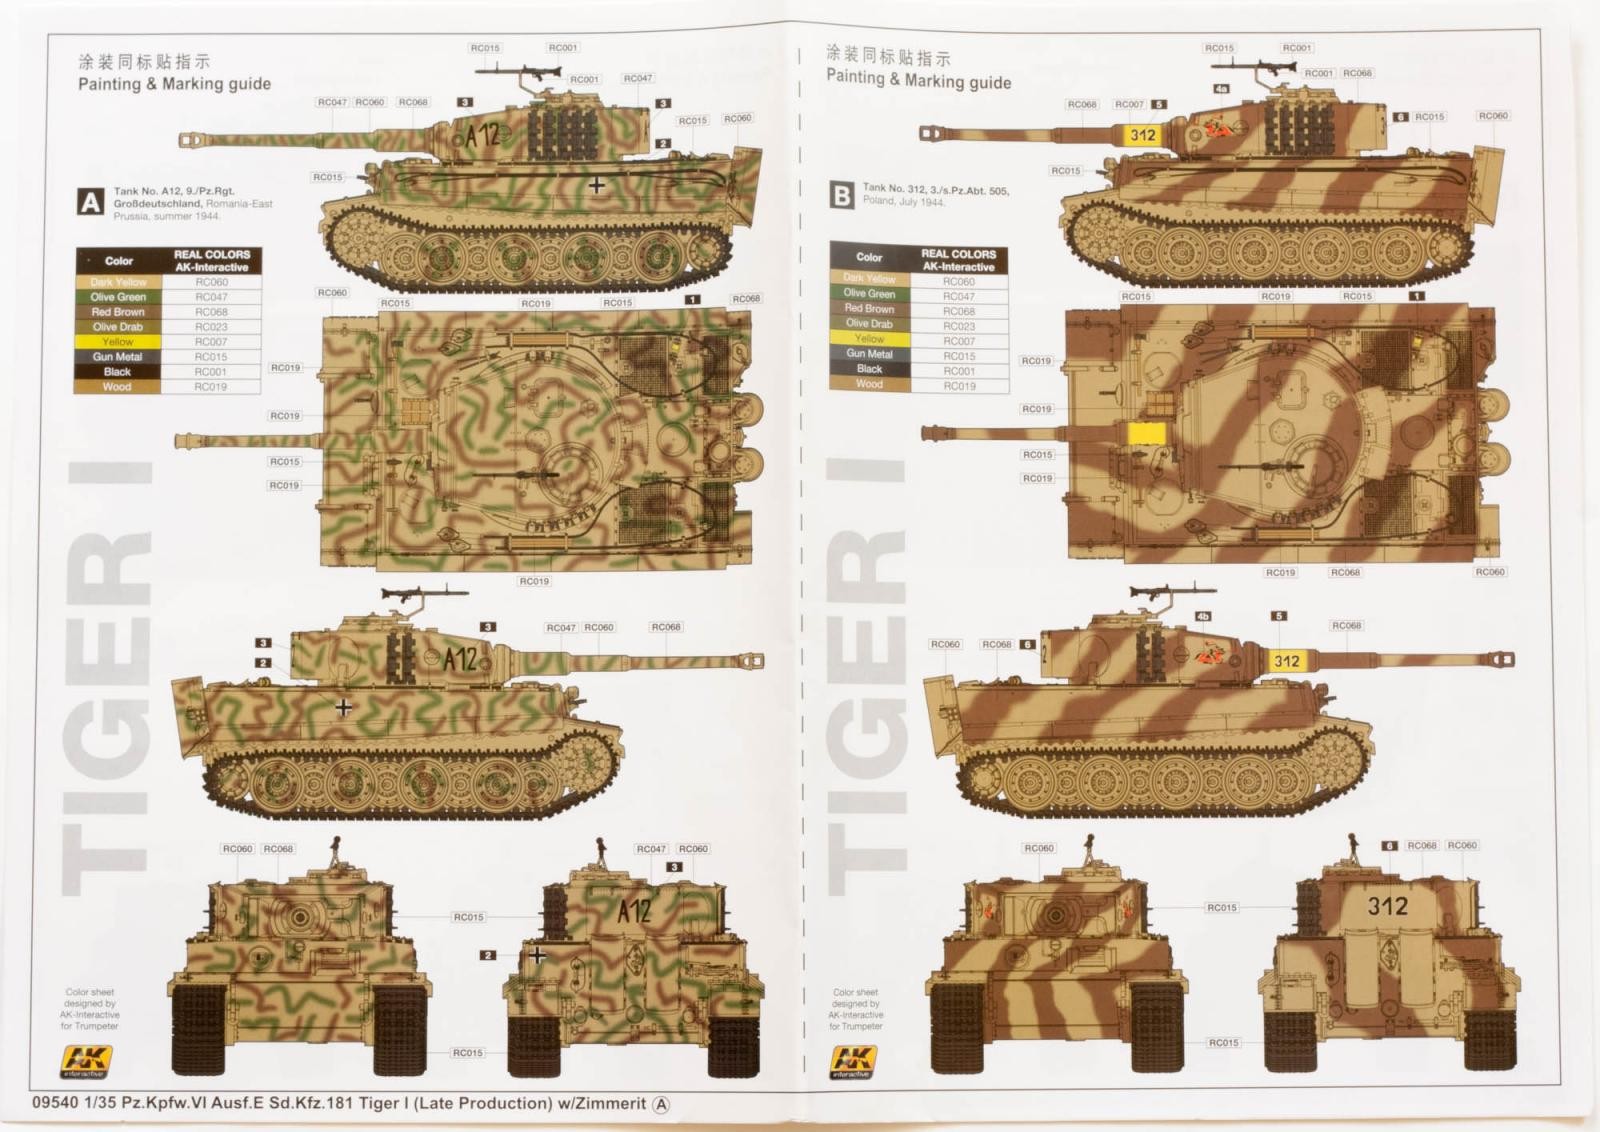 iModeler Review: Trumpeter 1/35 Tiger I late w/Zimmerit (09540 